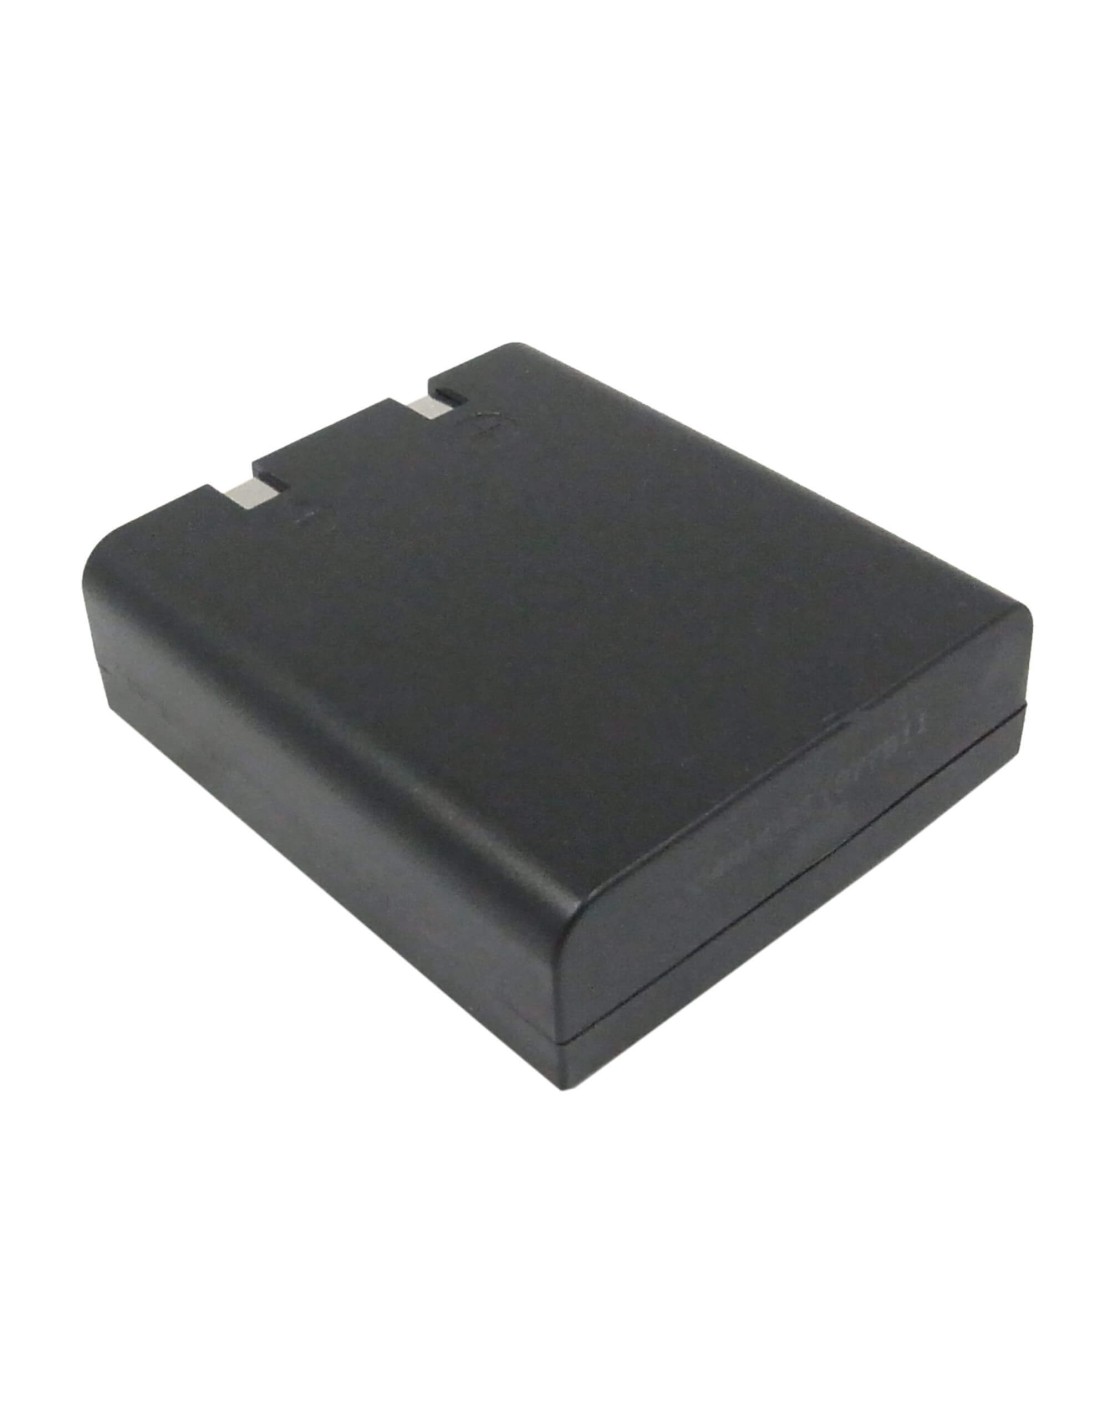 Battery for Olympia, C200 3.6V, 1200mAh - 4.32Wh